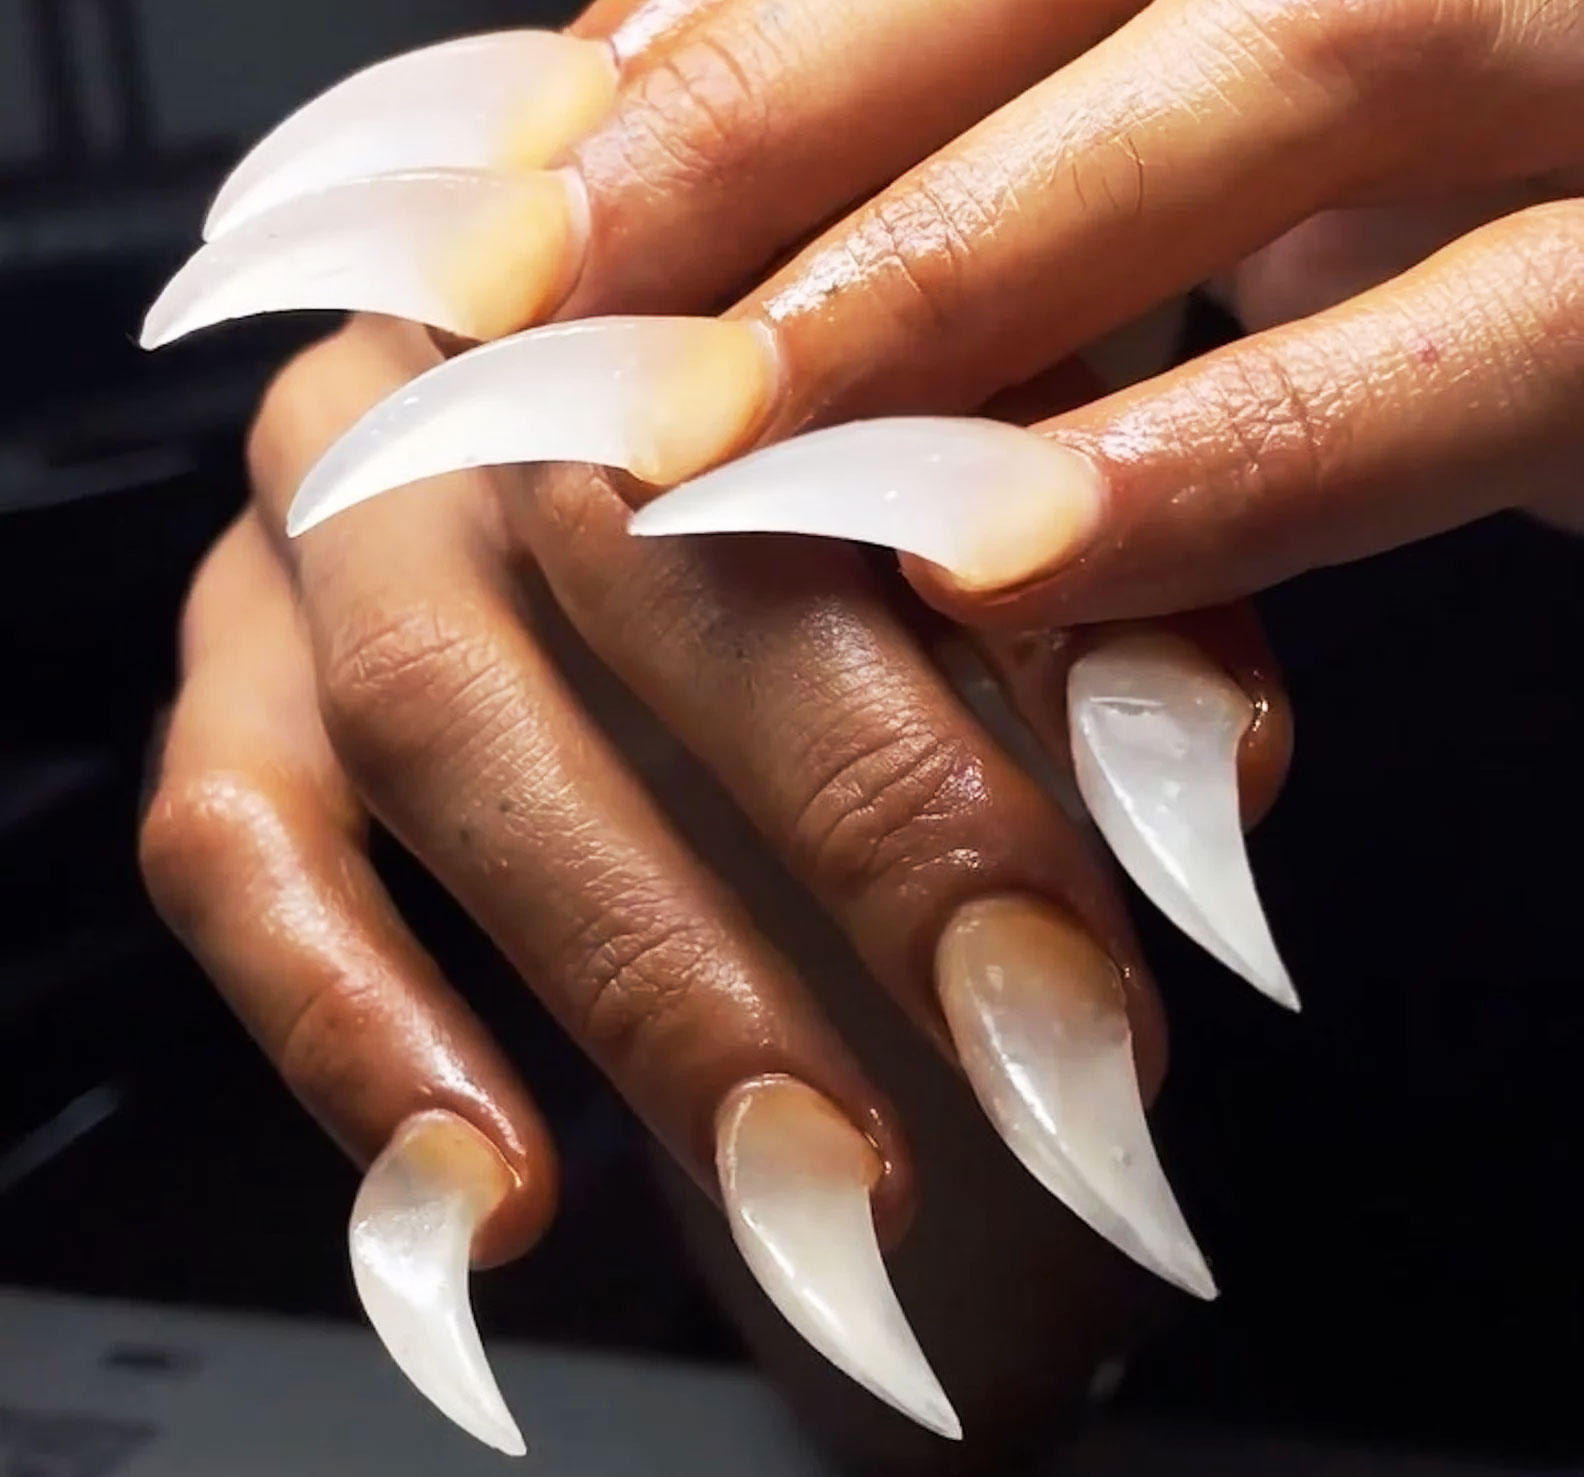 Meet the Nail Artist Behind the Divisive Claw-Nails Trend